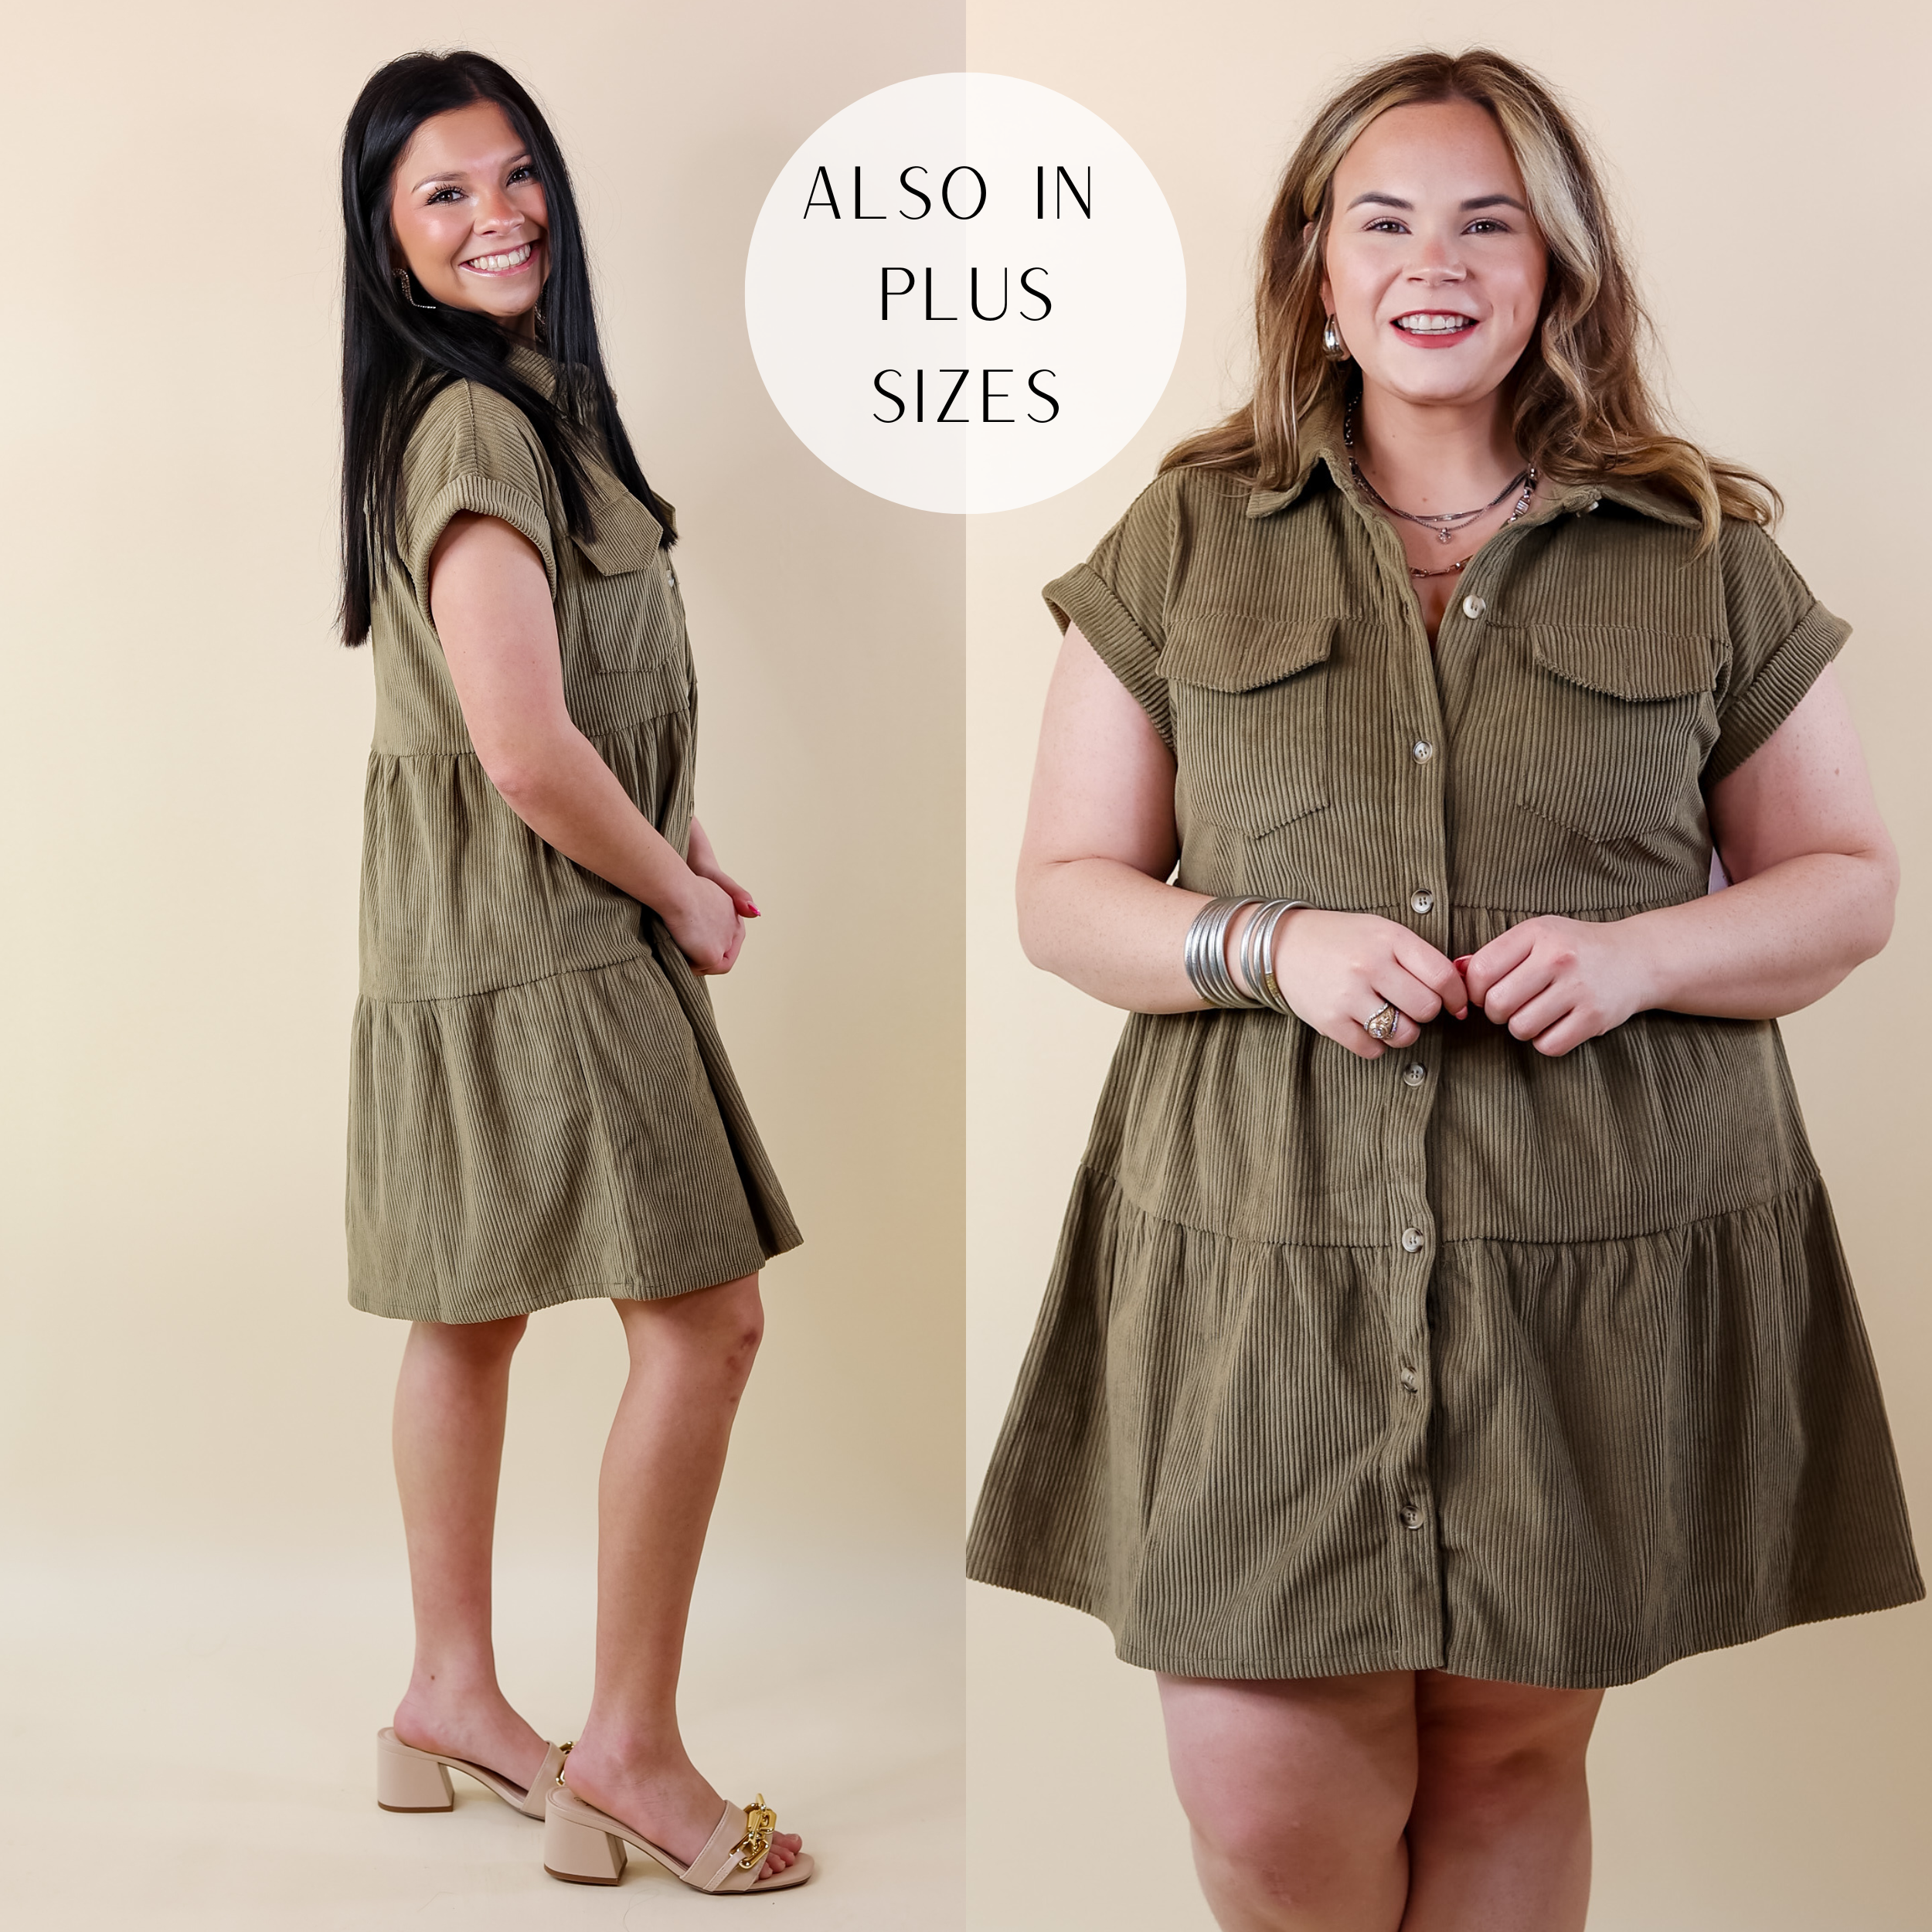 Latest Obsession Button Up Corduroy Dress in Olive Green - Giddy Up Glamour Boutique